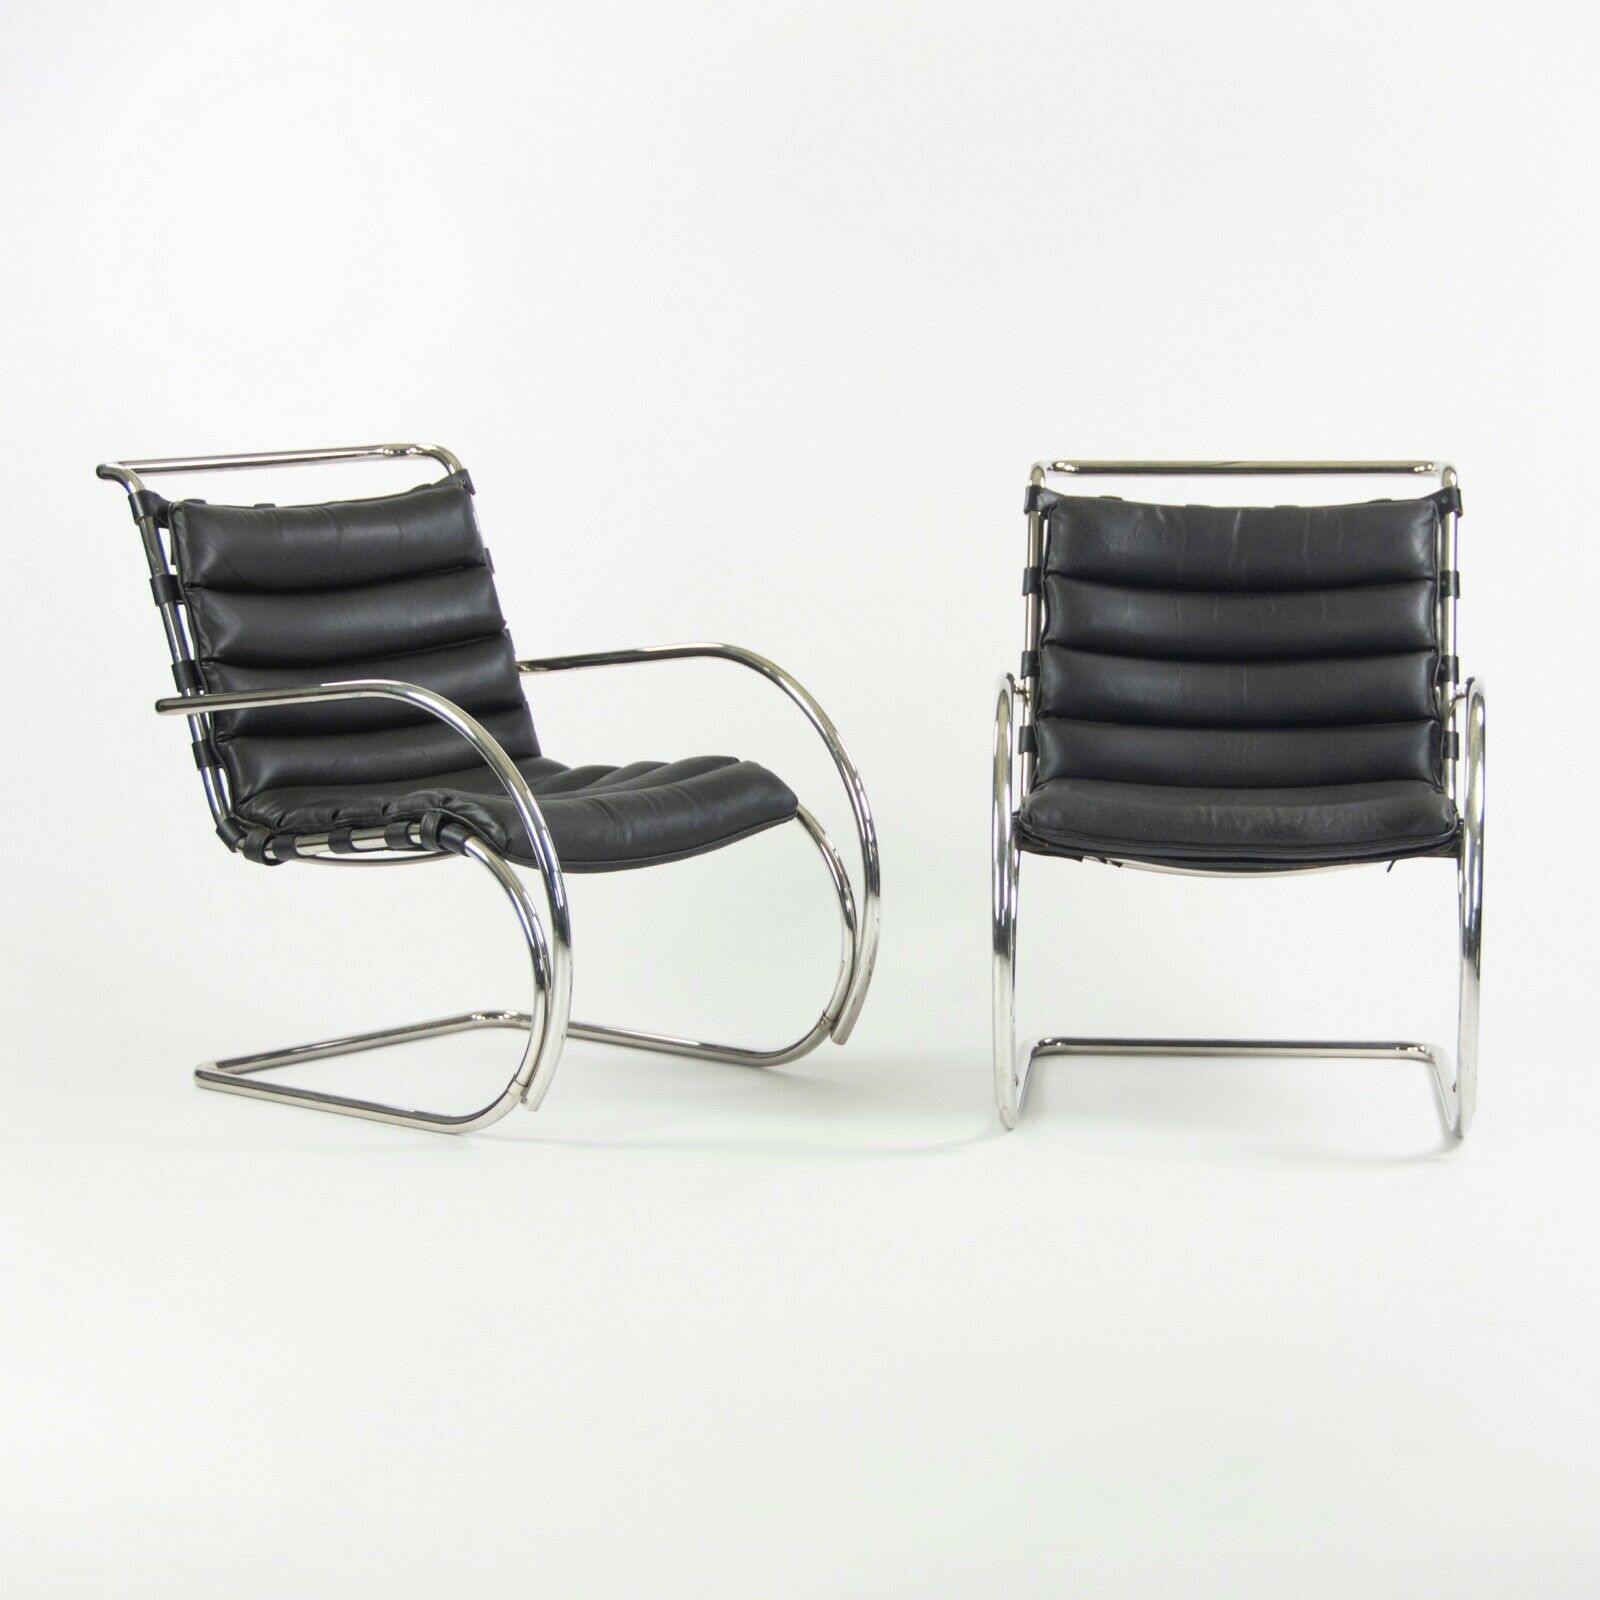 MR Chaise Lounge Chair by Mies Van der Rohe for Knoll